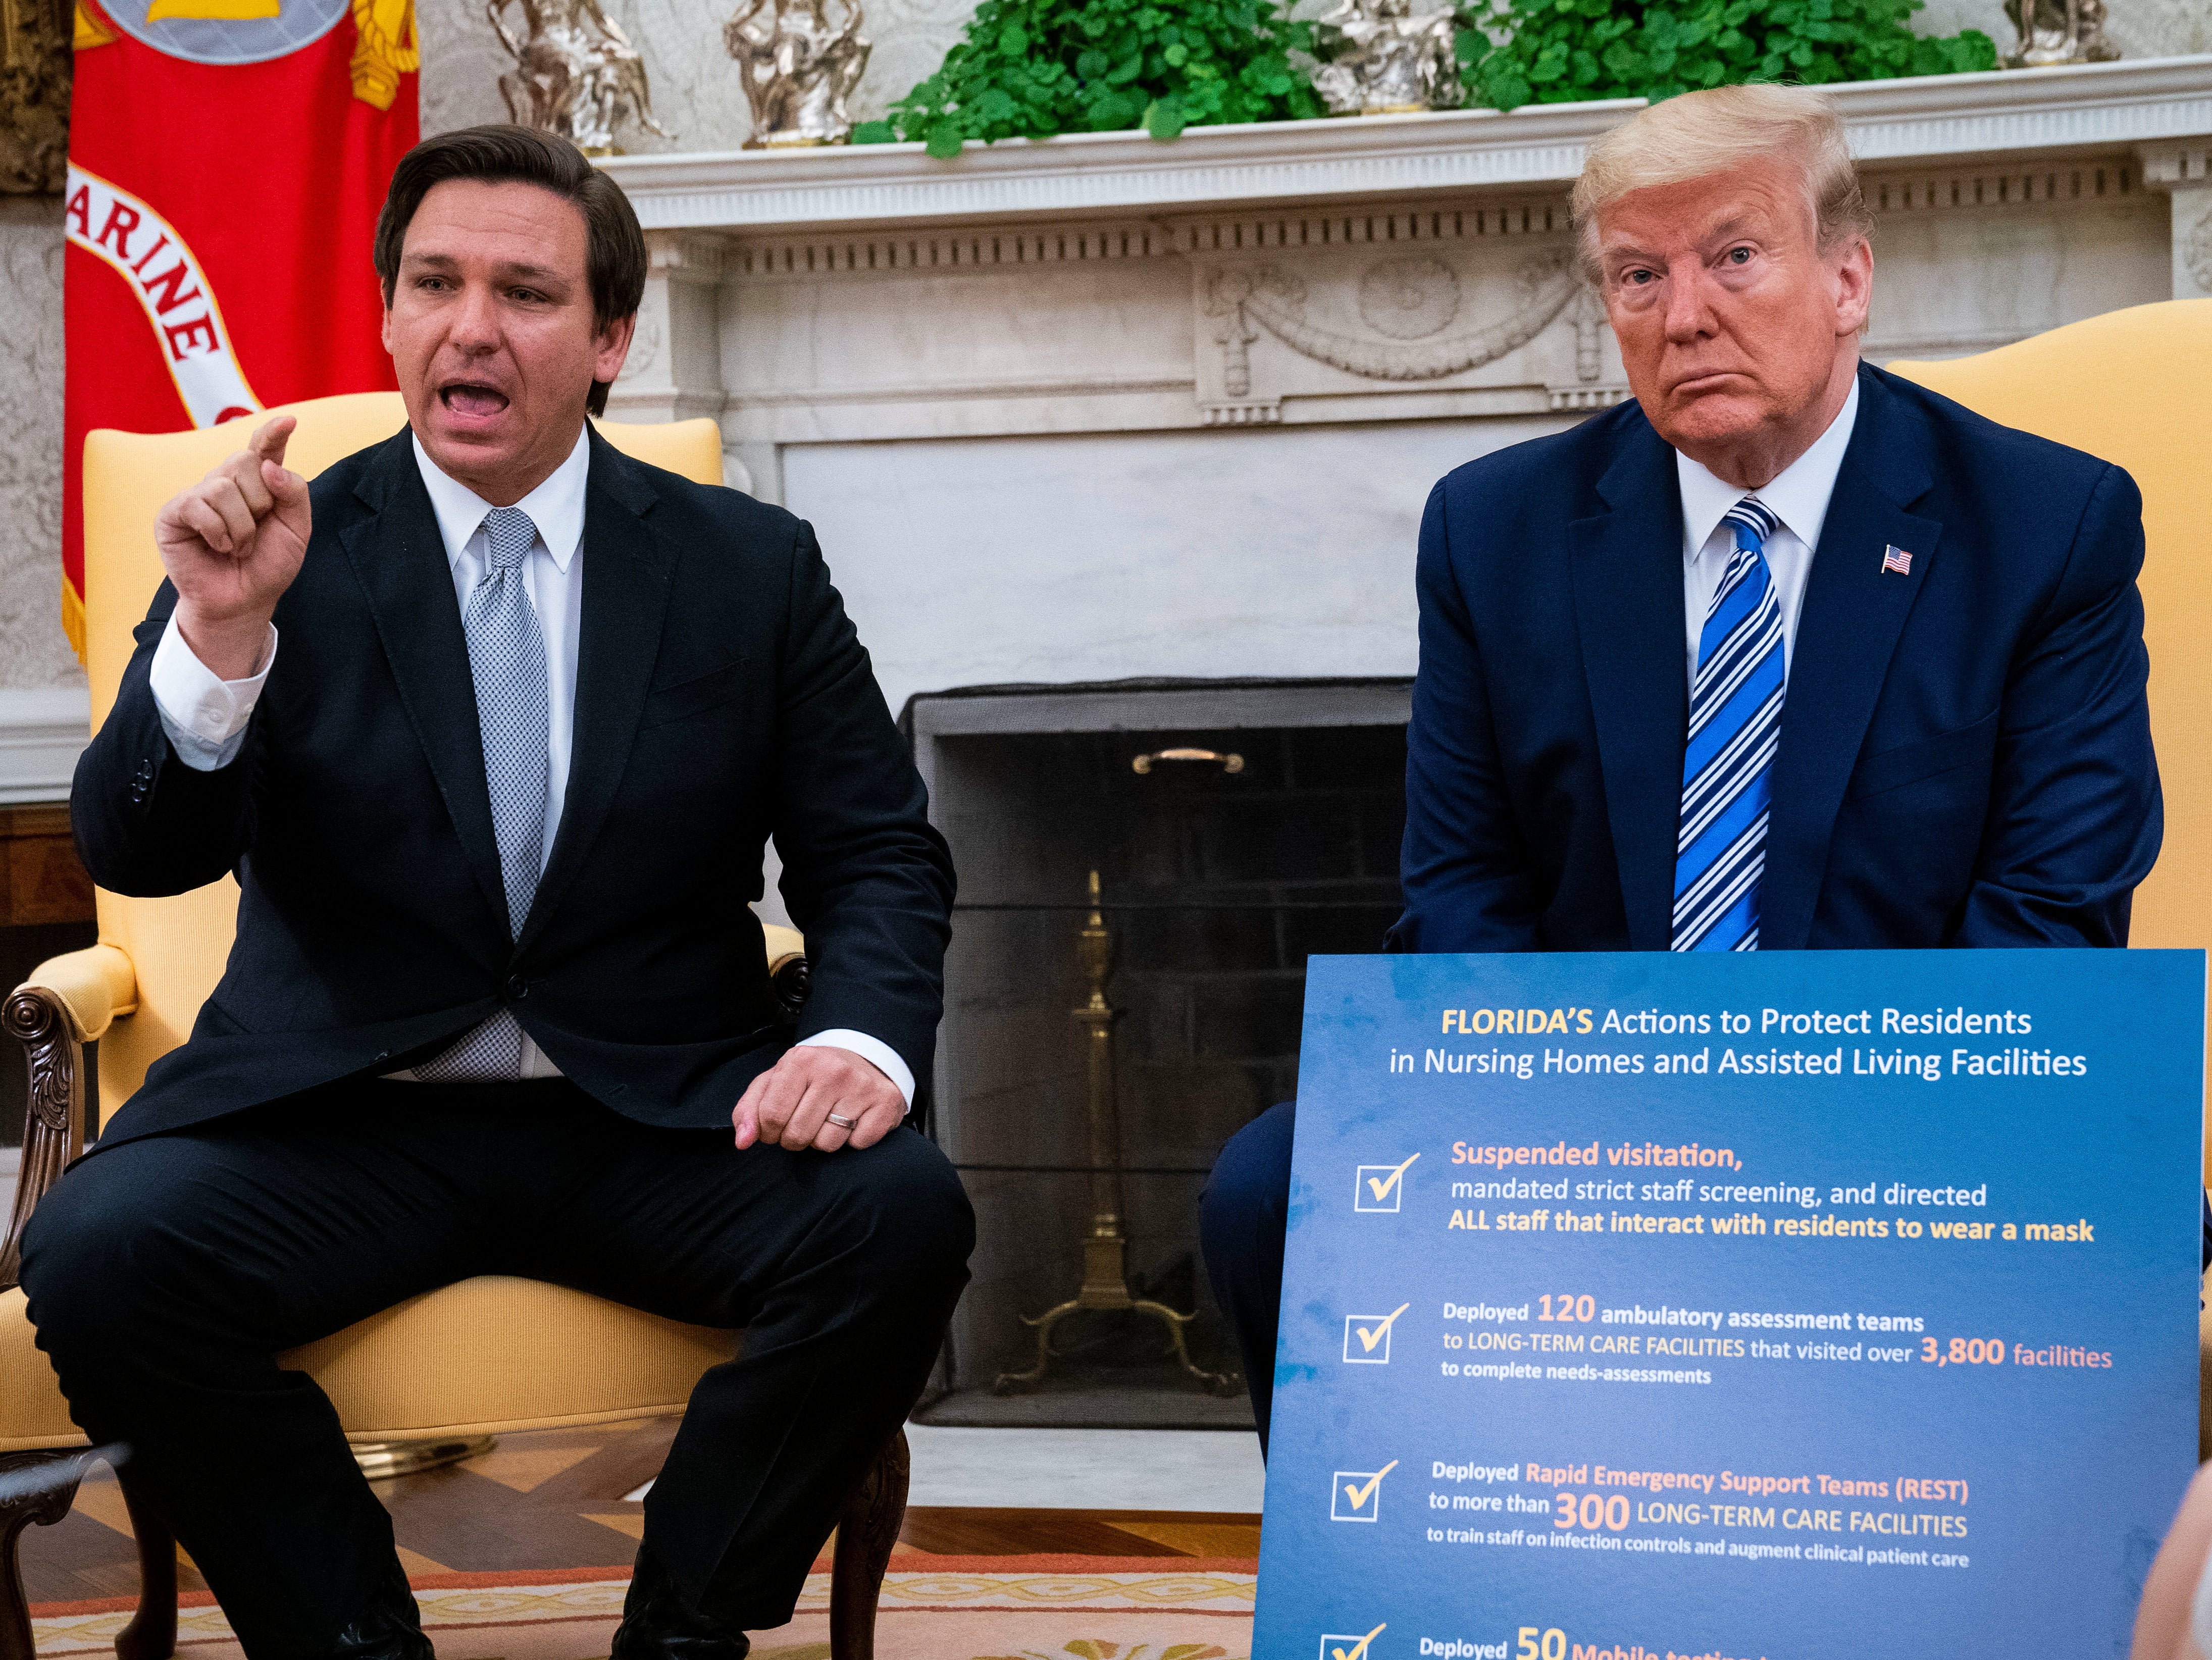 Florida Gov. Ron DeSantis (L) speaks while meeting with U.S. President Donald Trump in the Oval Office of the White House on April 28, 2020 in Washington, DC